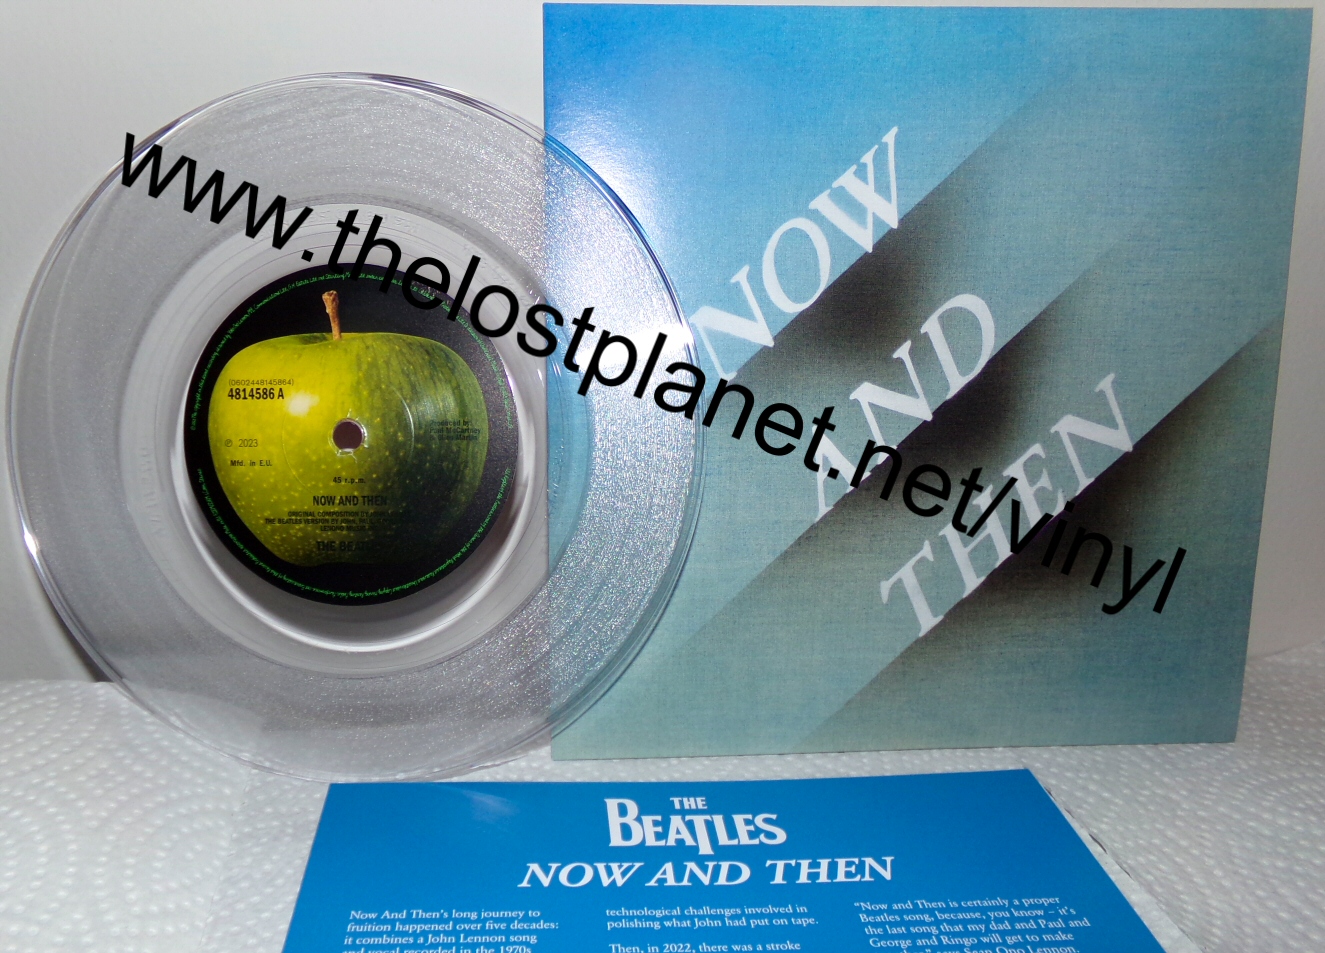 Beatles Now and Then 7" clear vinyl